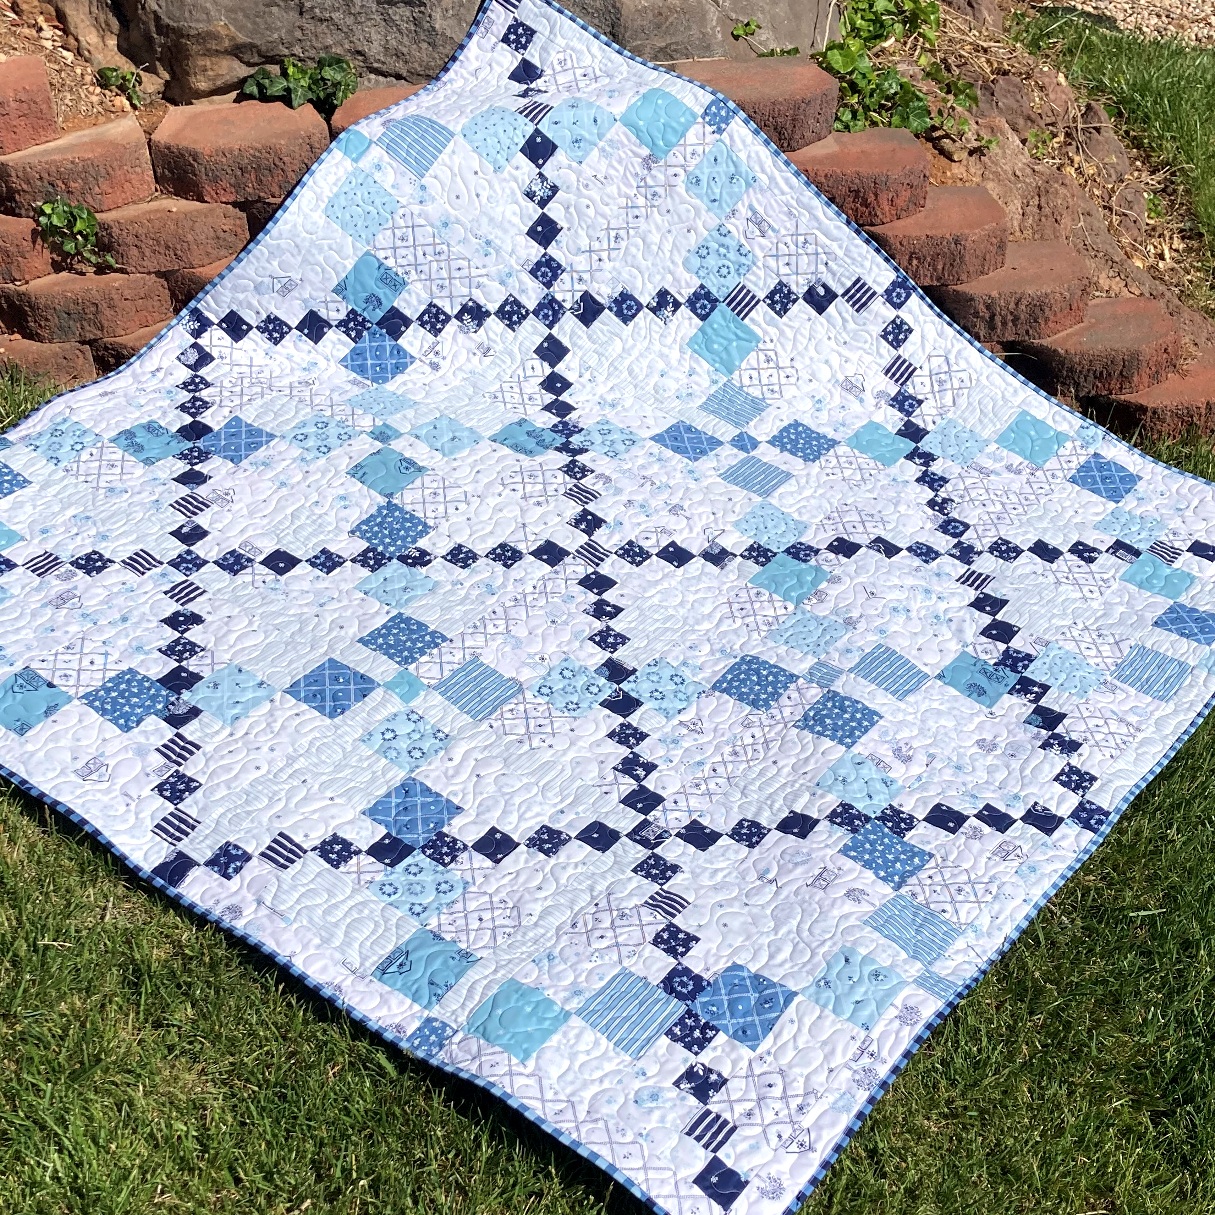 It's a Snap Downloadable 3 Yard Quilt Pattern